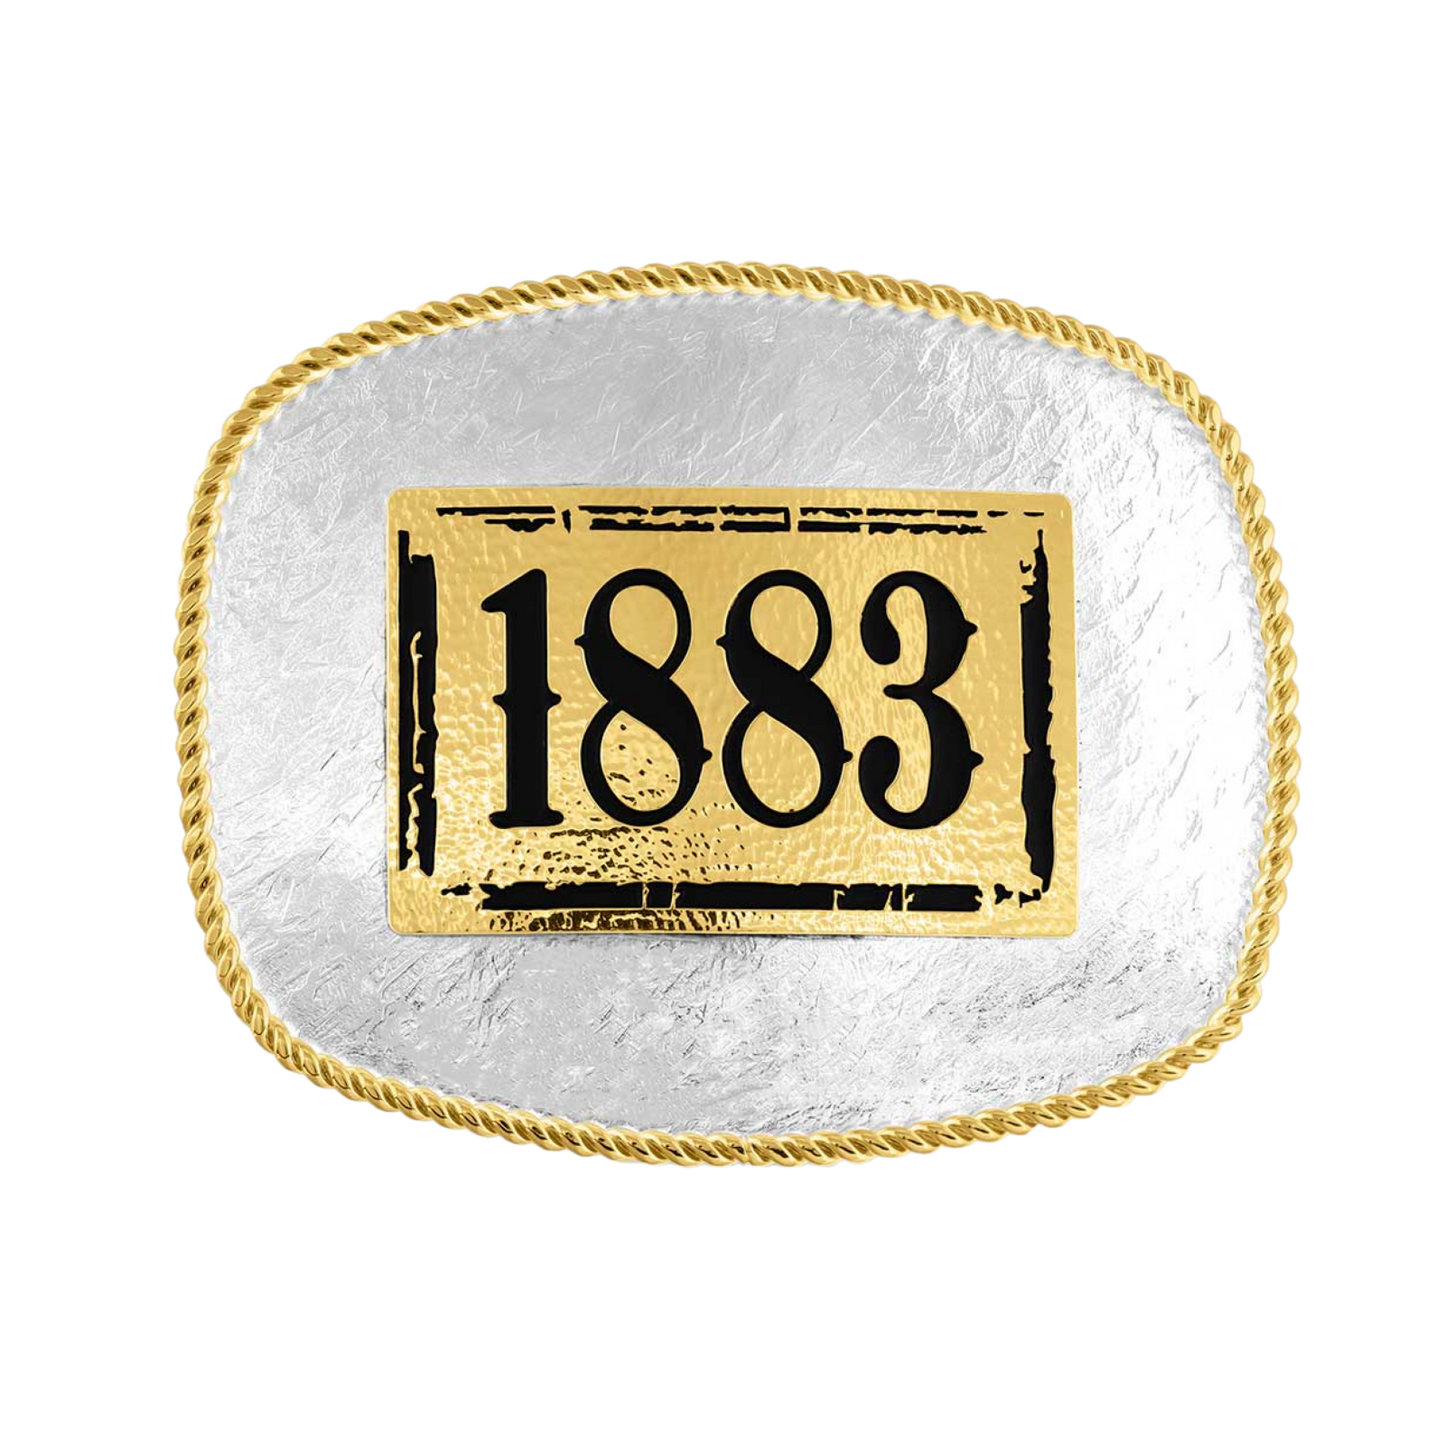 Load image into Gallery viewer, Montana Silversmiths® 1883 Rippling Water Belt Buckle PAR18831
